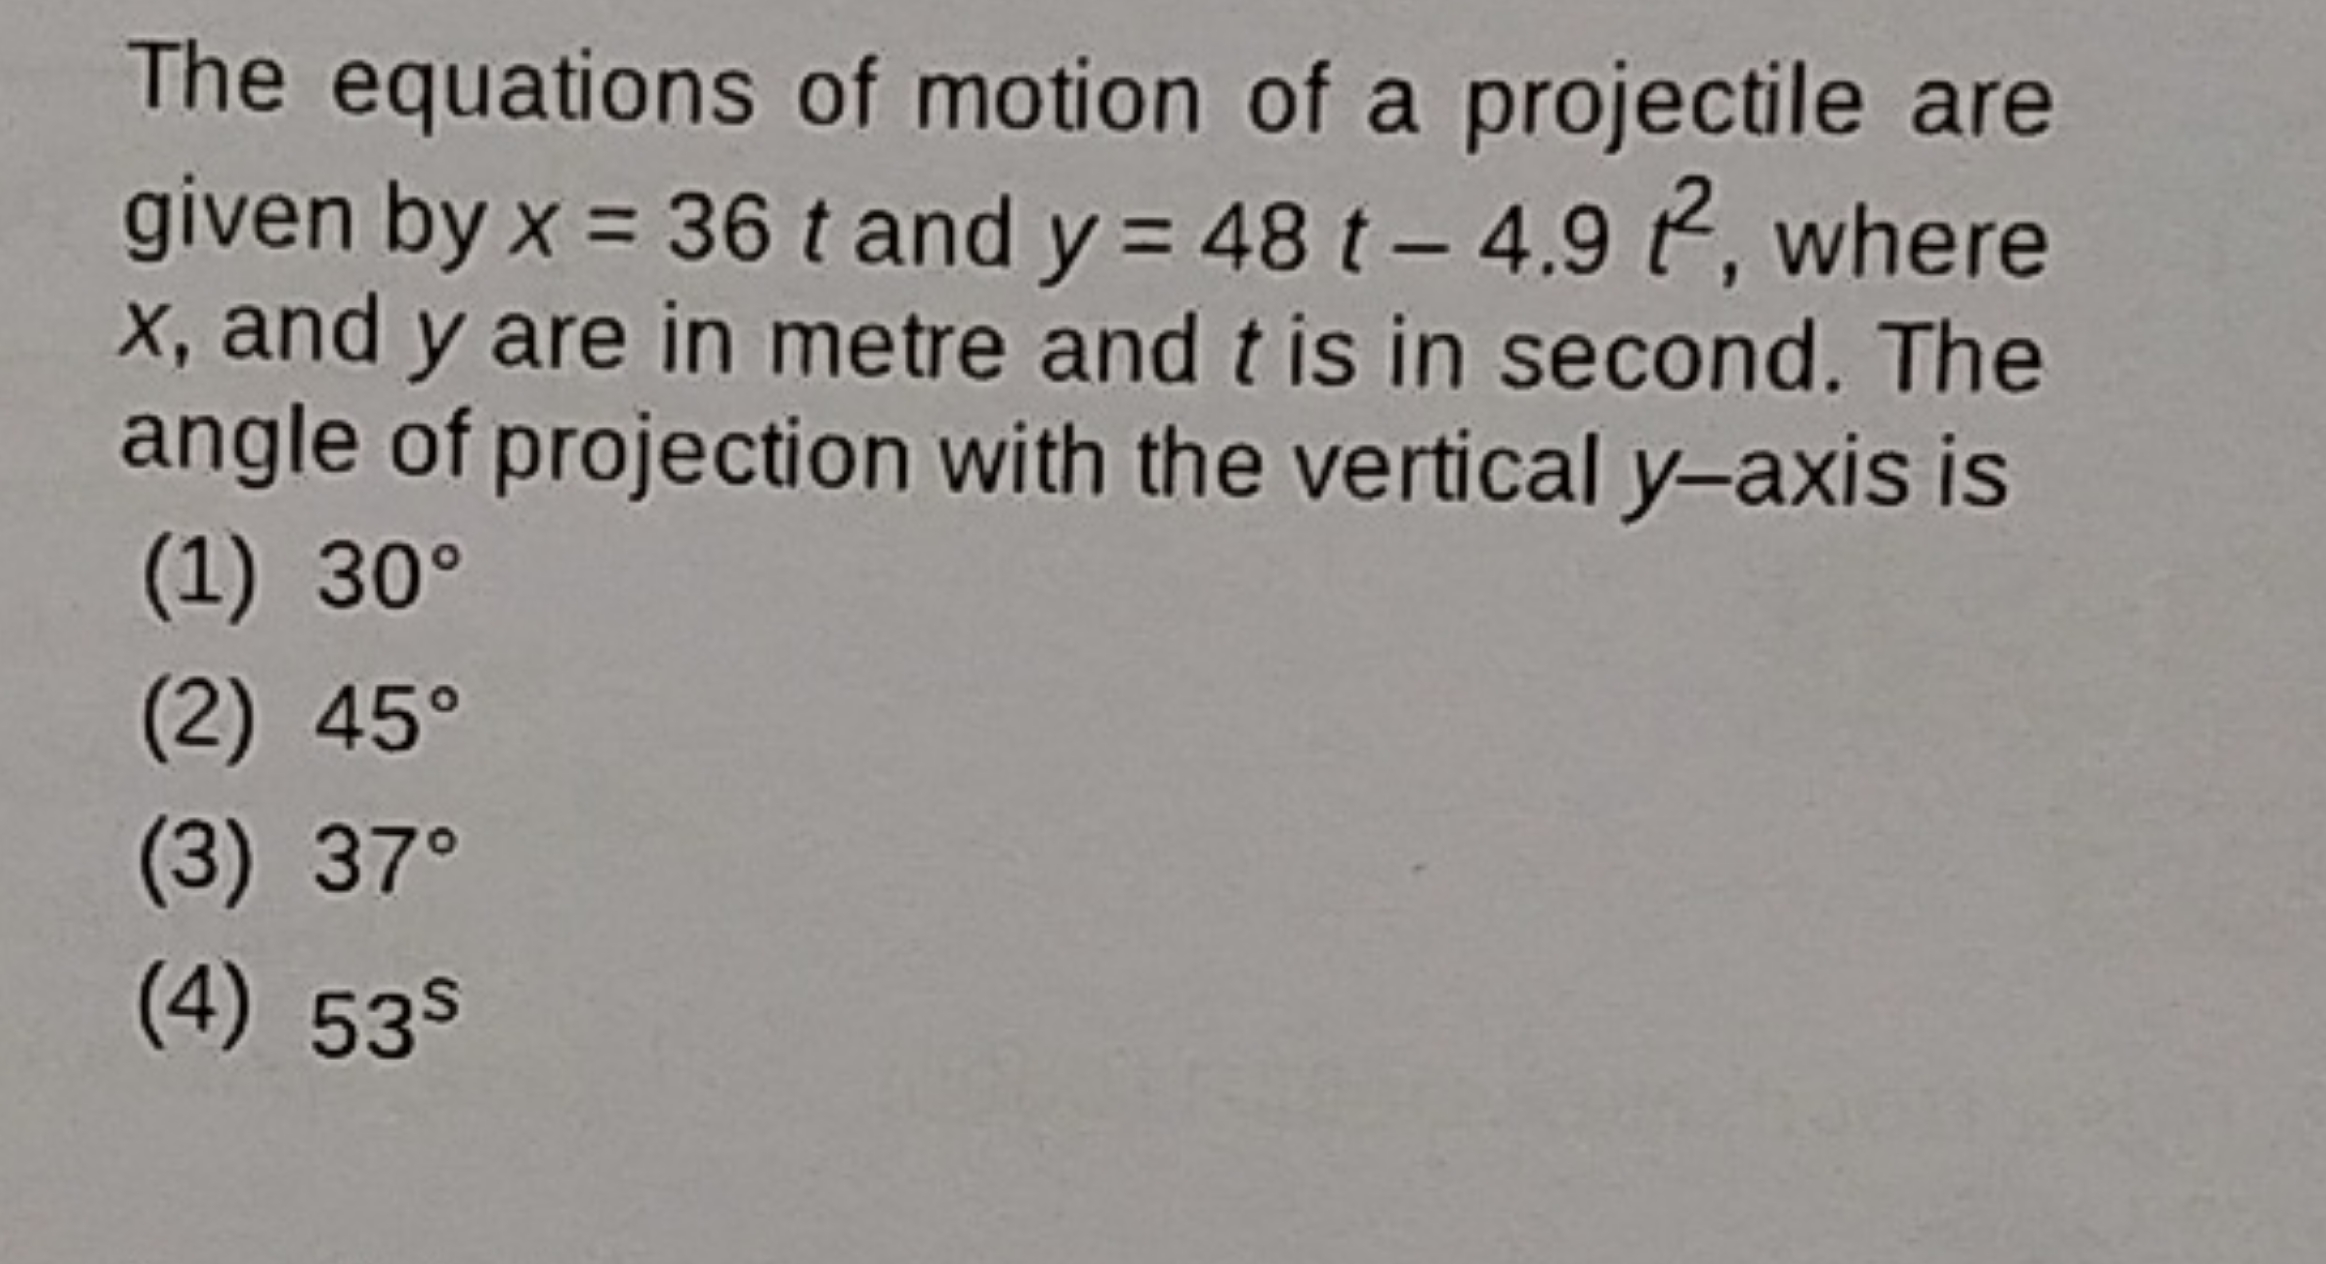 The equations of motion of a projectile are given by x=36t and y=48t−4